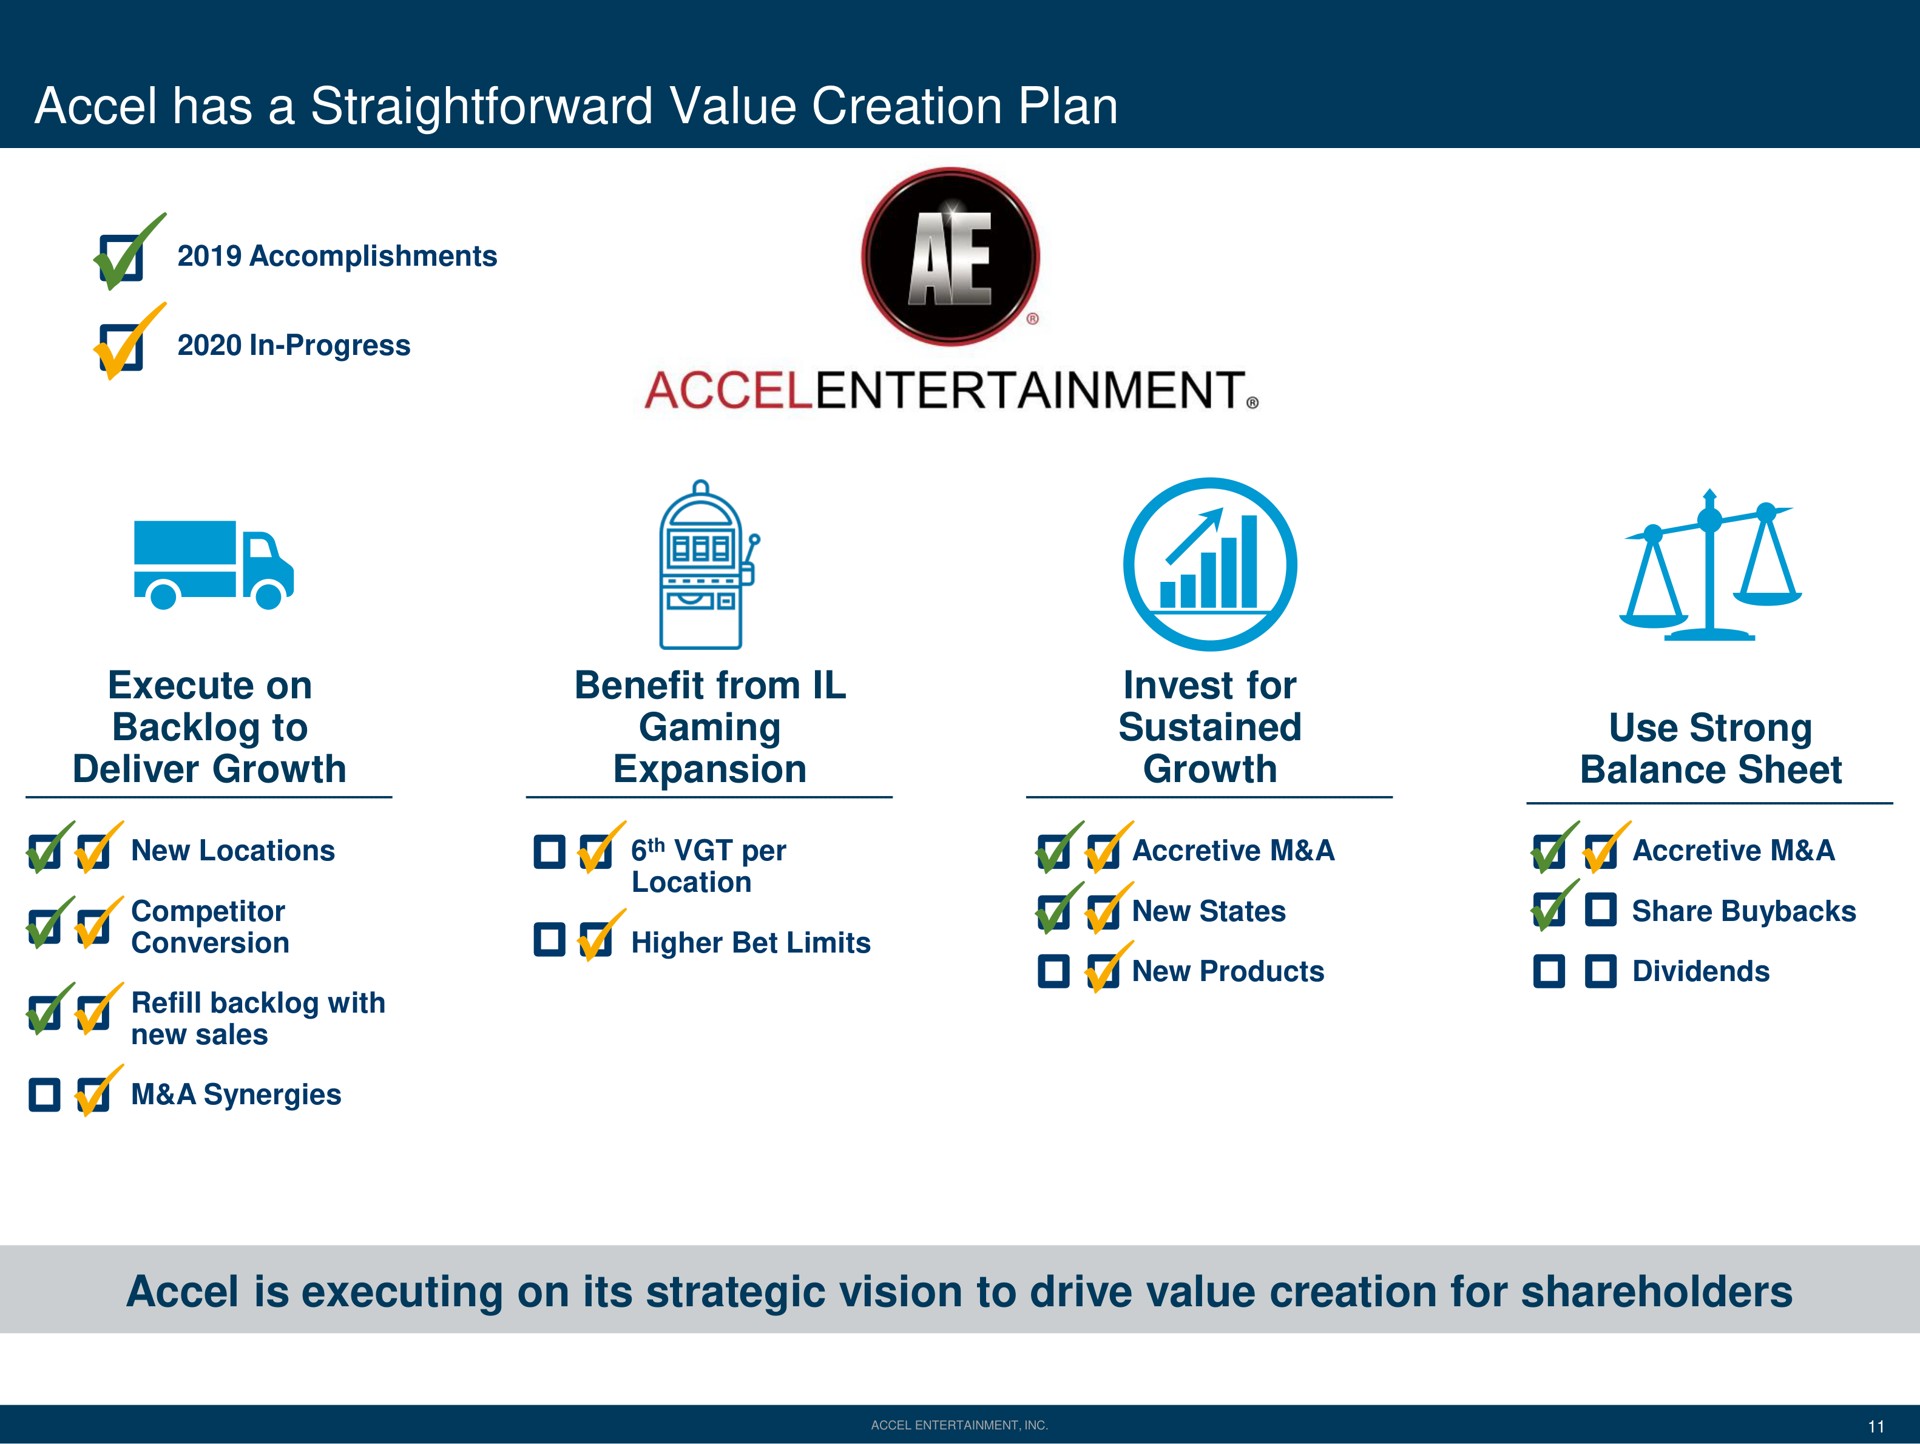 has a straightforward value creation plan execute on backlog to deliver growth benefit from gaming expansion invest for sustained growth use strong balance sheet is executing on its strategic vision to drive value creation for shareholders you new locations refill with per accretive accretive new products dividends | Accel Entertaiment